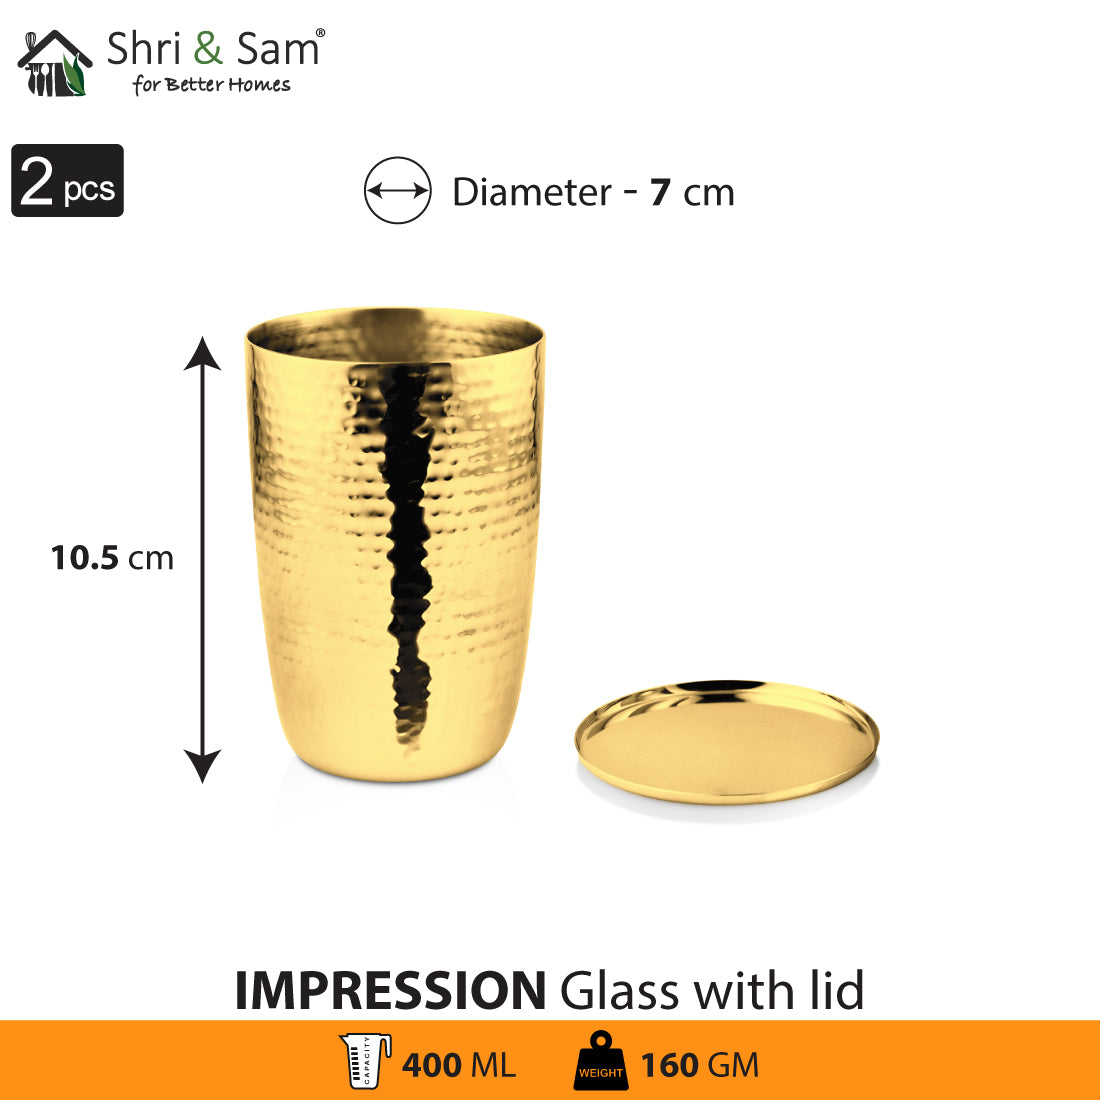 Stainless Steel 2 PCS Gold PVD Coated Hammered Glass with SS Lid Impression